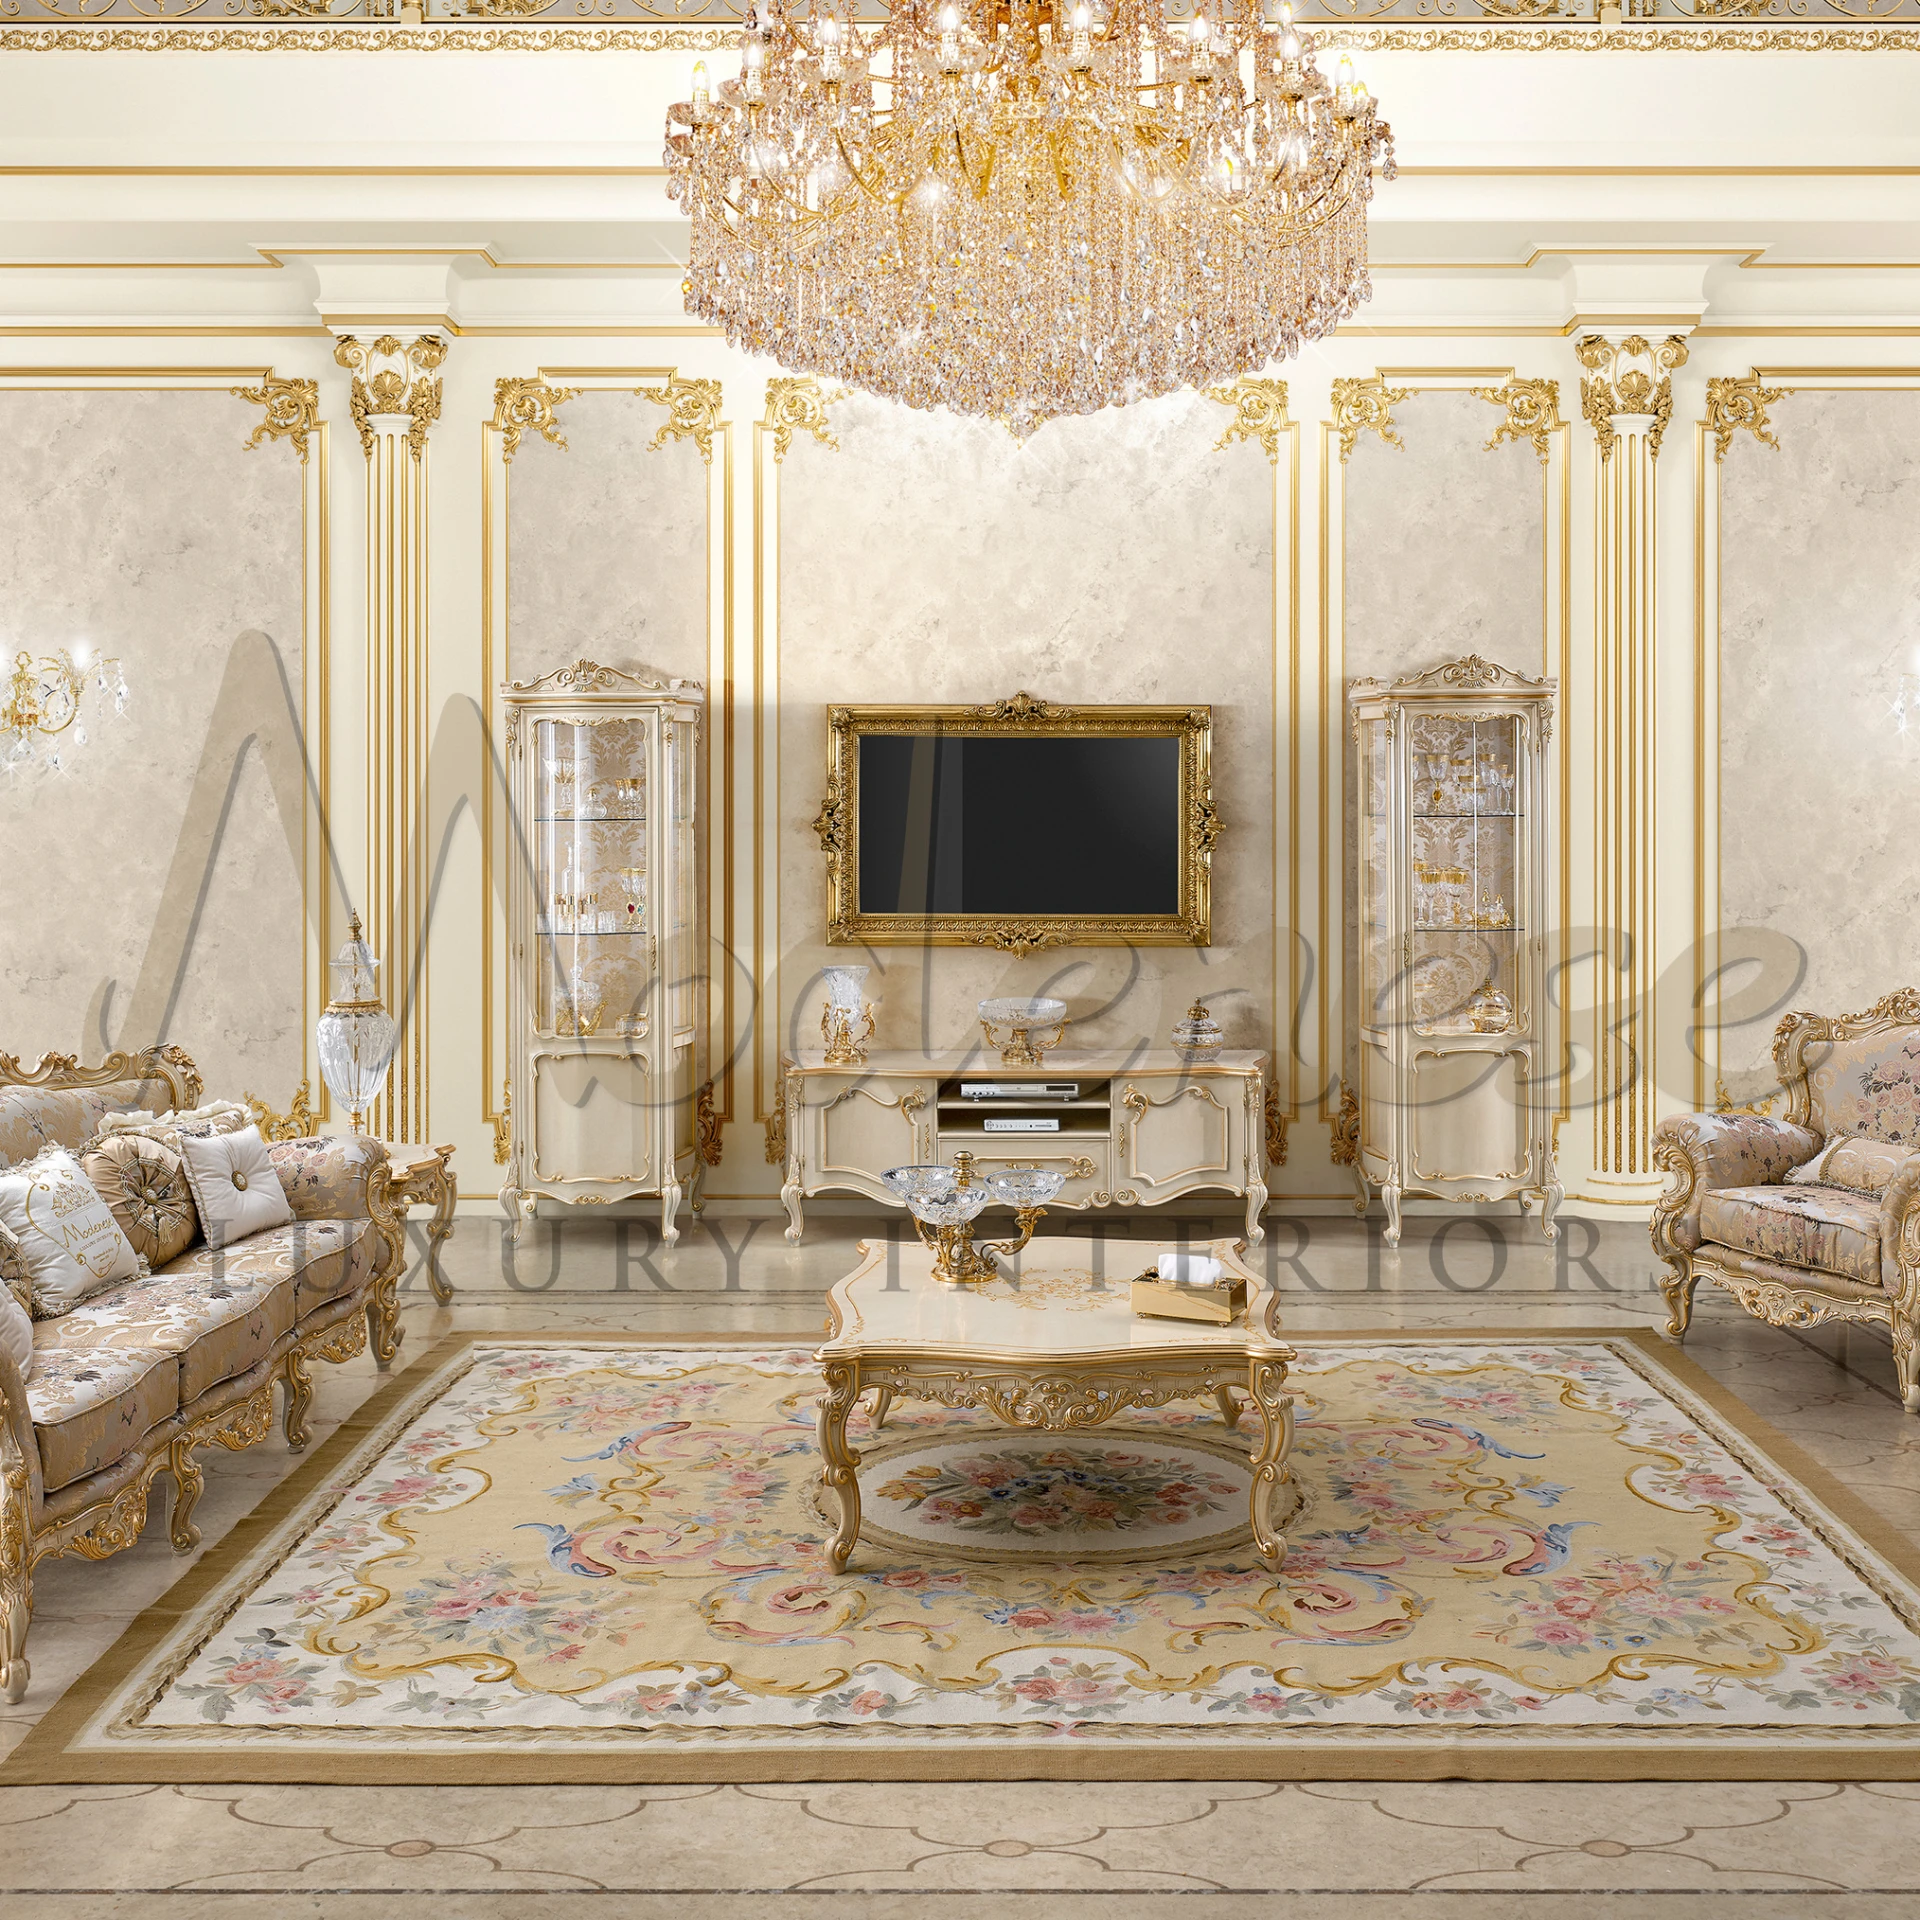 A fancy sitting room with crystal chandelier, fancy furniture, and a large decorative rug on the floor